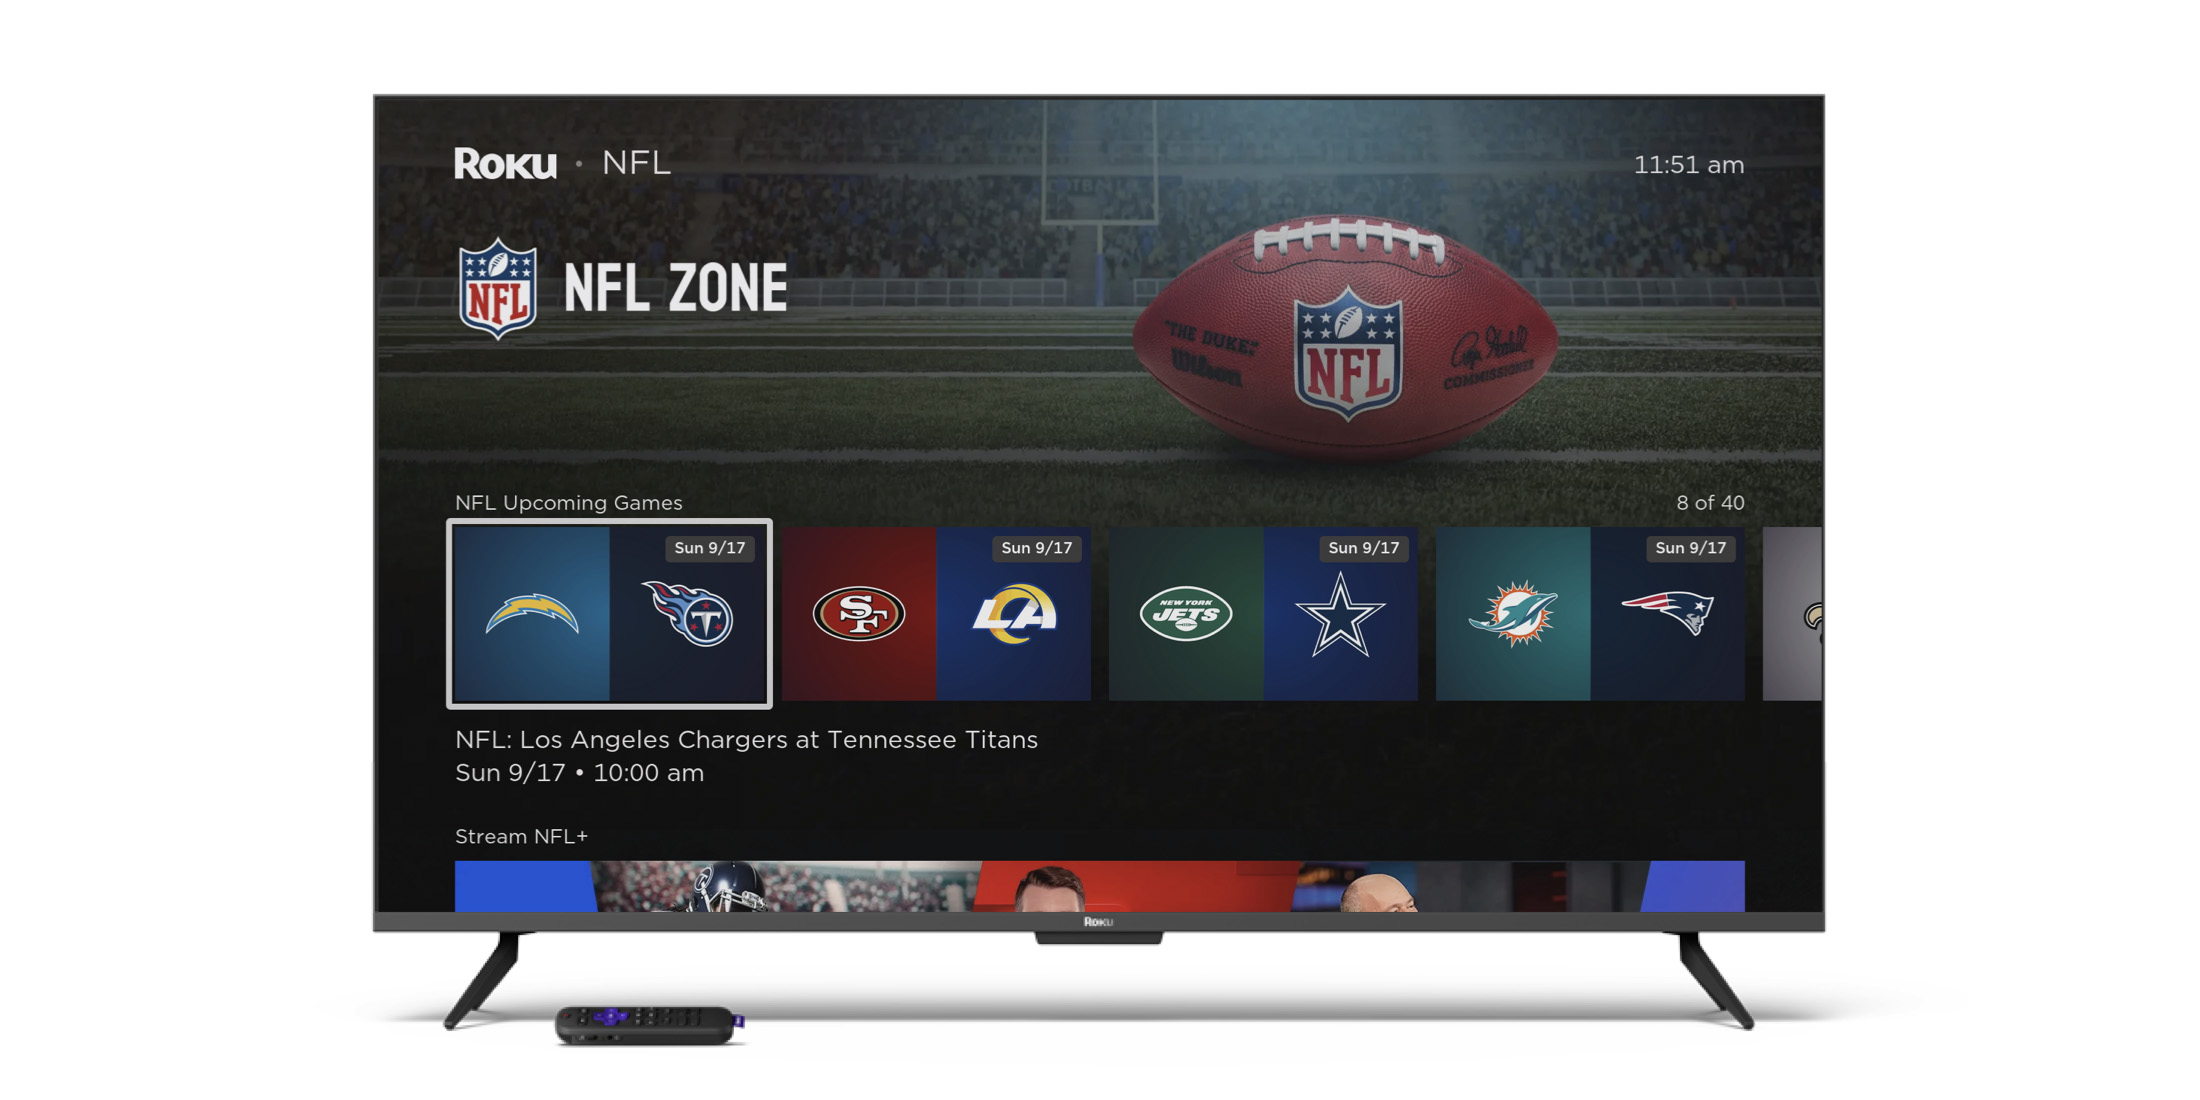 Roku launches 'NFL Zone' without Sunday Ticket support